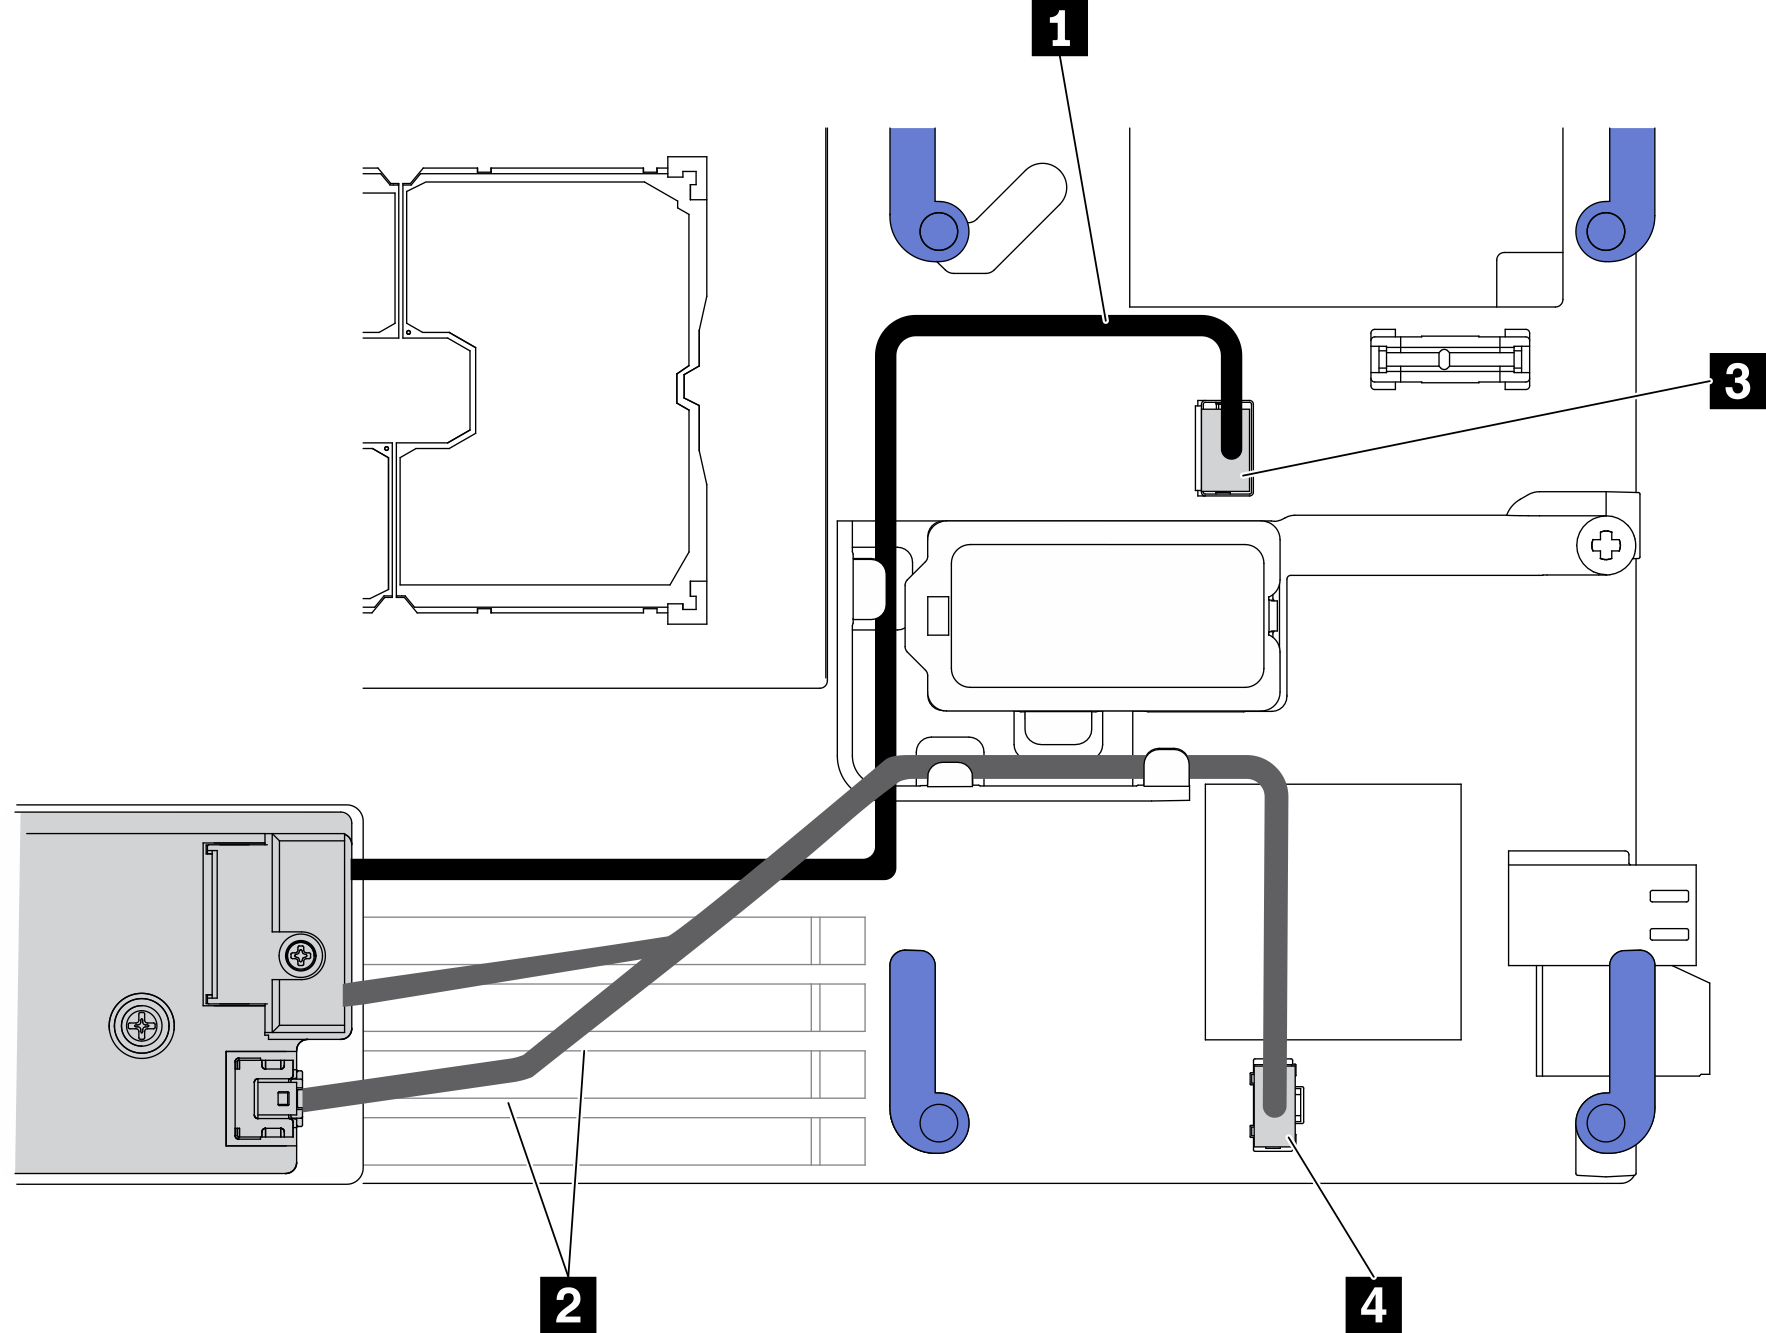 M.2 backplane assembly cable routing guidance